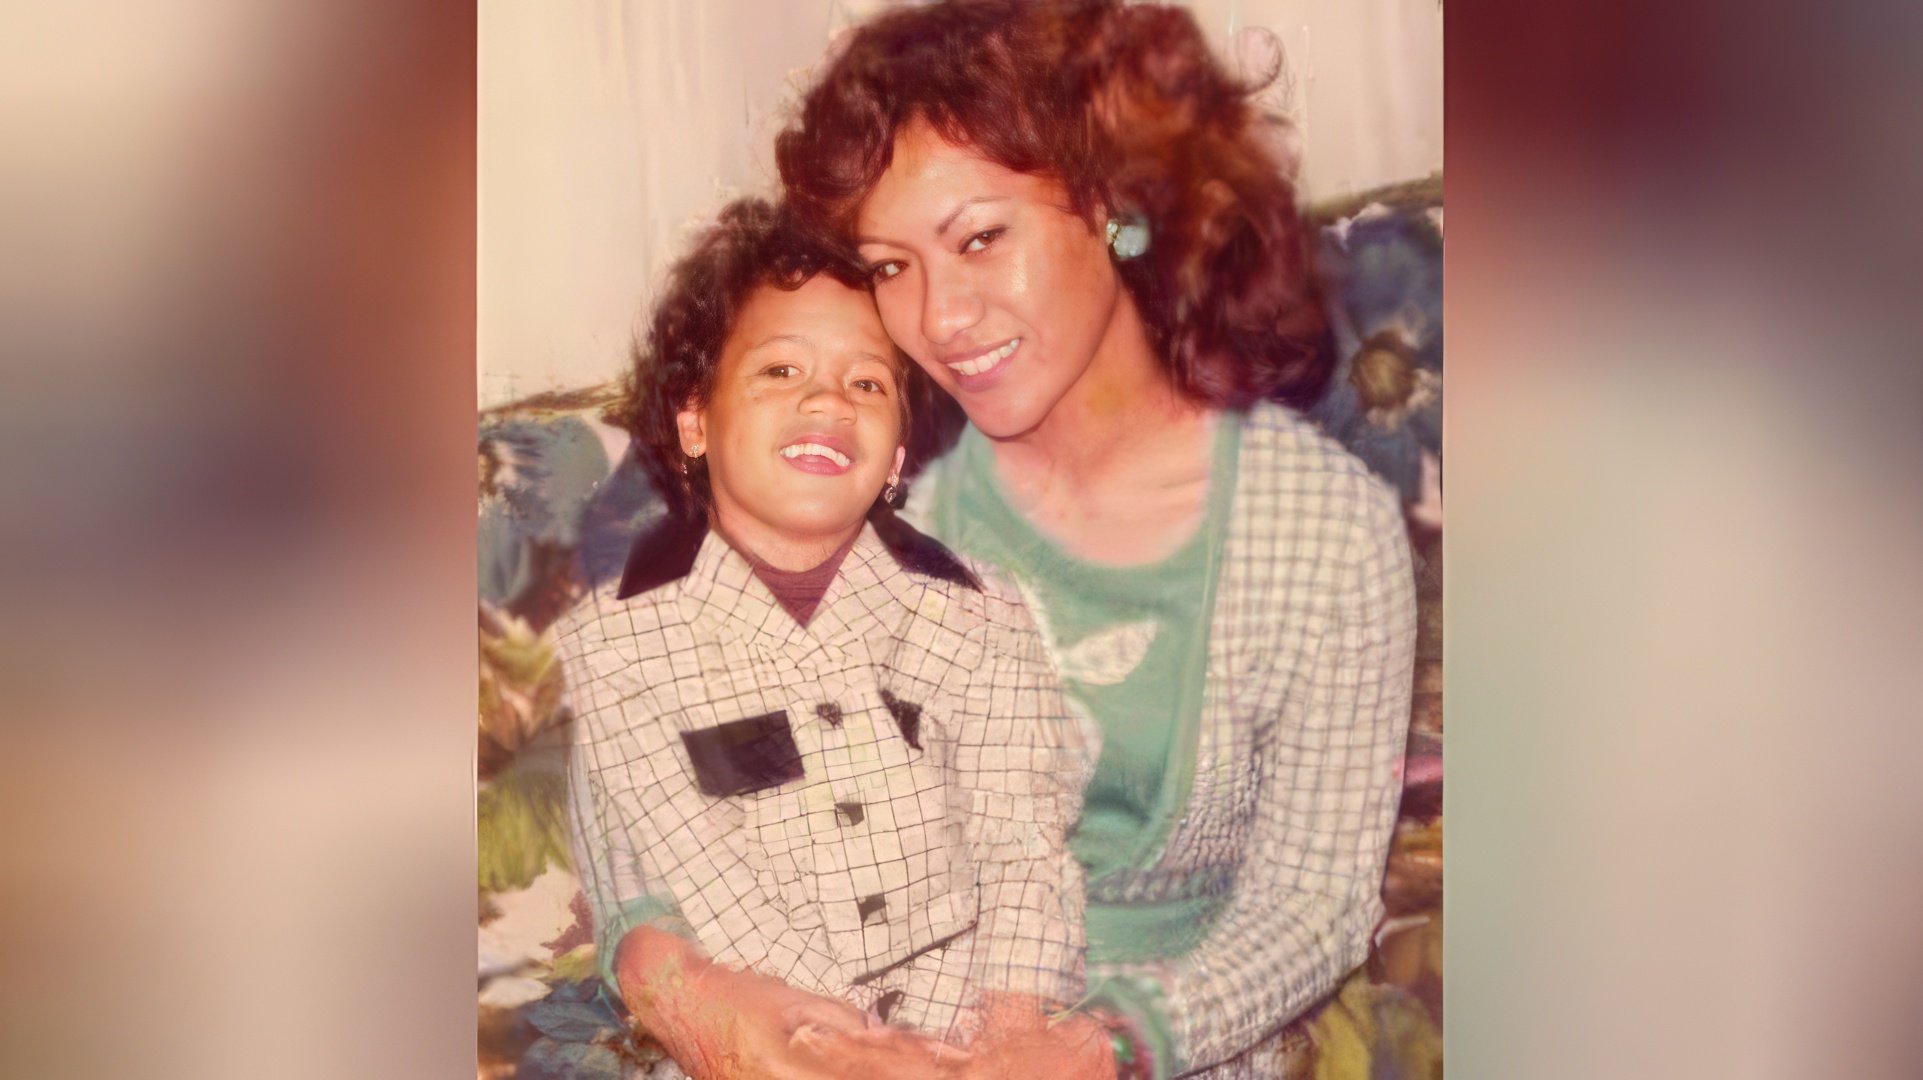 Dwayne Johnson with his mom